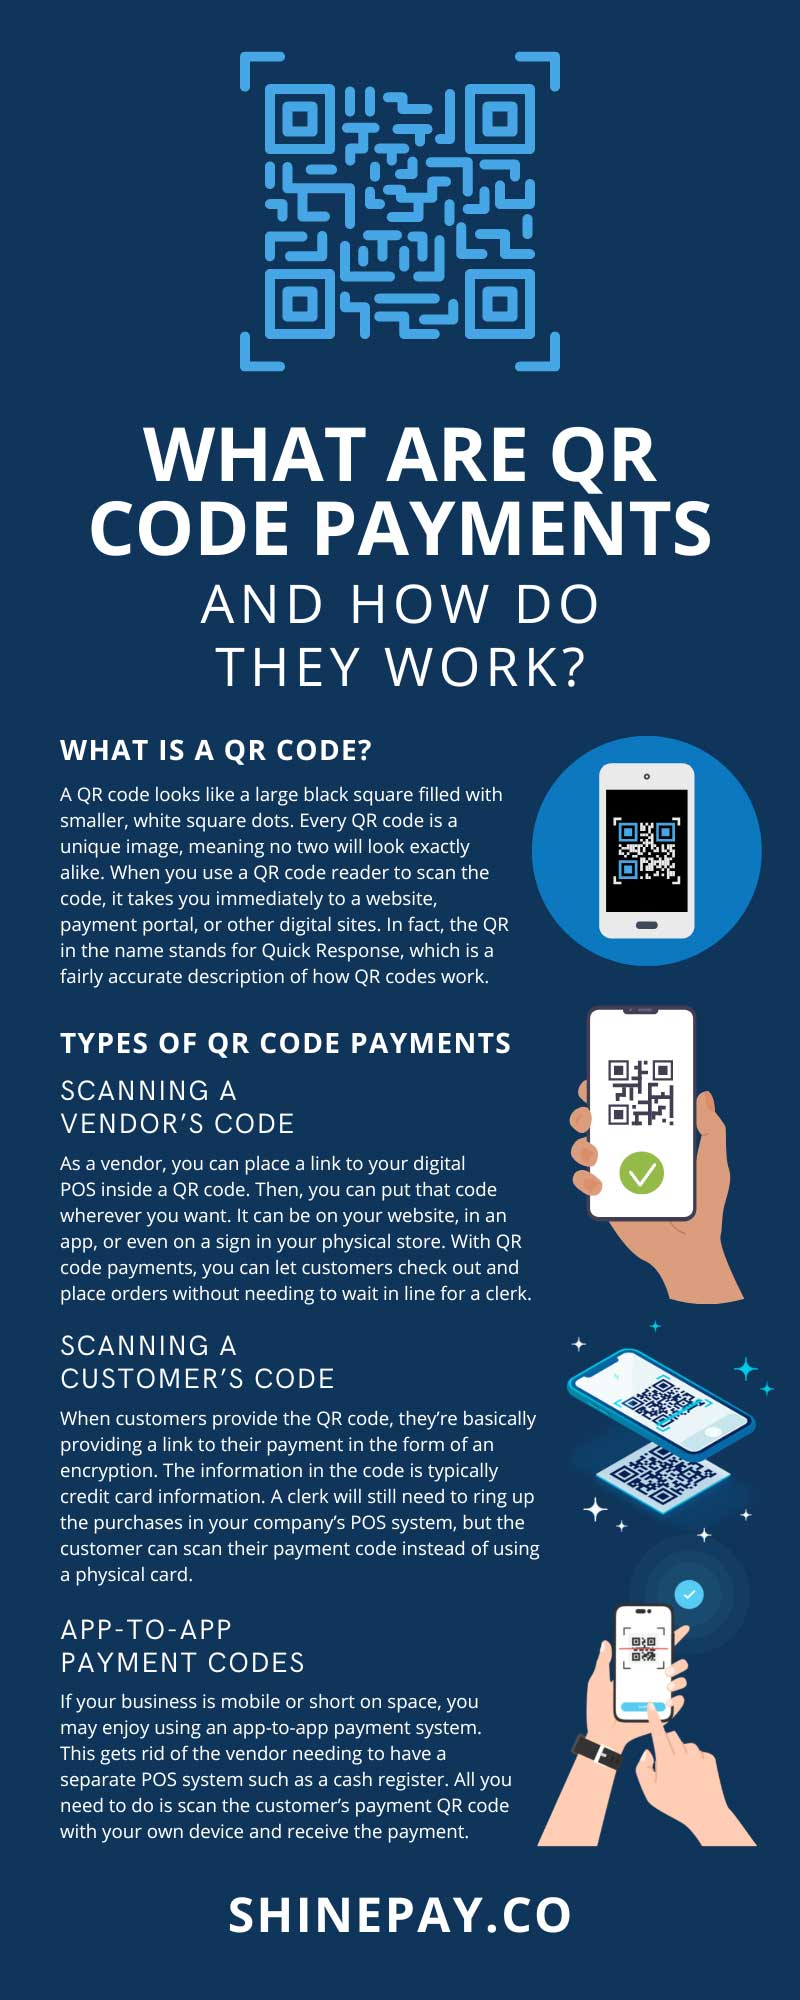 What Are QR Code Payments and How Do They Work?